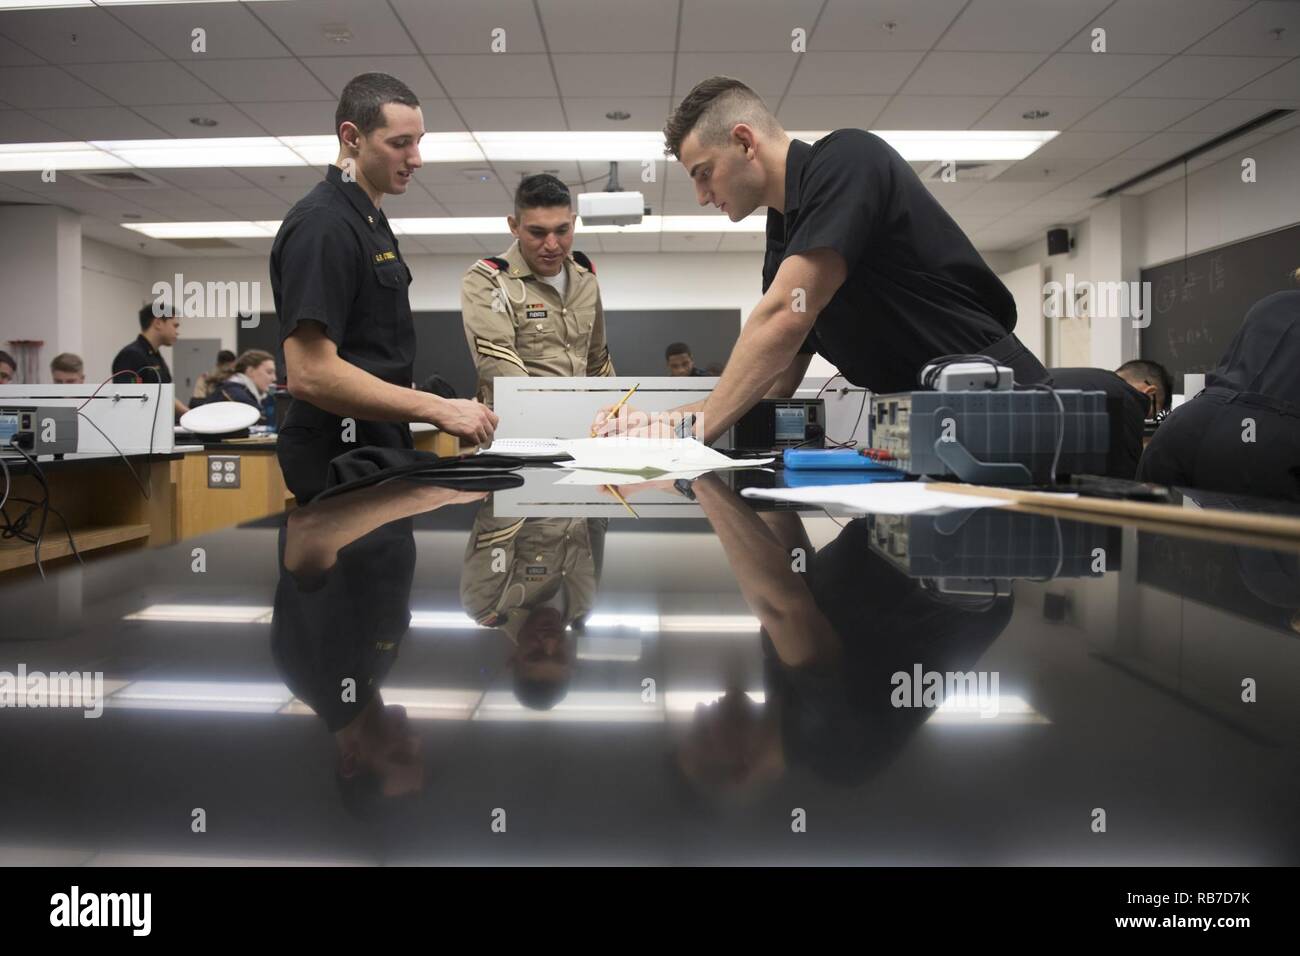 ANNAPOLIS, Md. (Dec. 02, 2016)  United States Naval Academy (USNA) Midshipman 3rd Class Cody Mendelow, Midshipman 3rd Class Gavin O’Donnell and Mexican Cadet Ricardo Fuentes work together to solve a physics equation. Cadets from Mexico's Military Academy, Heroico Colegio Militar, are visiting USNA to play an exhibition American-style football game with the USNA Sprint Football team. Stock Photo